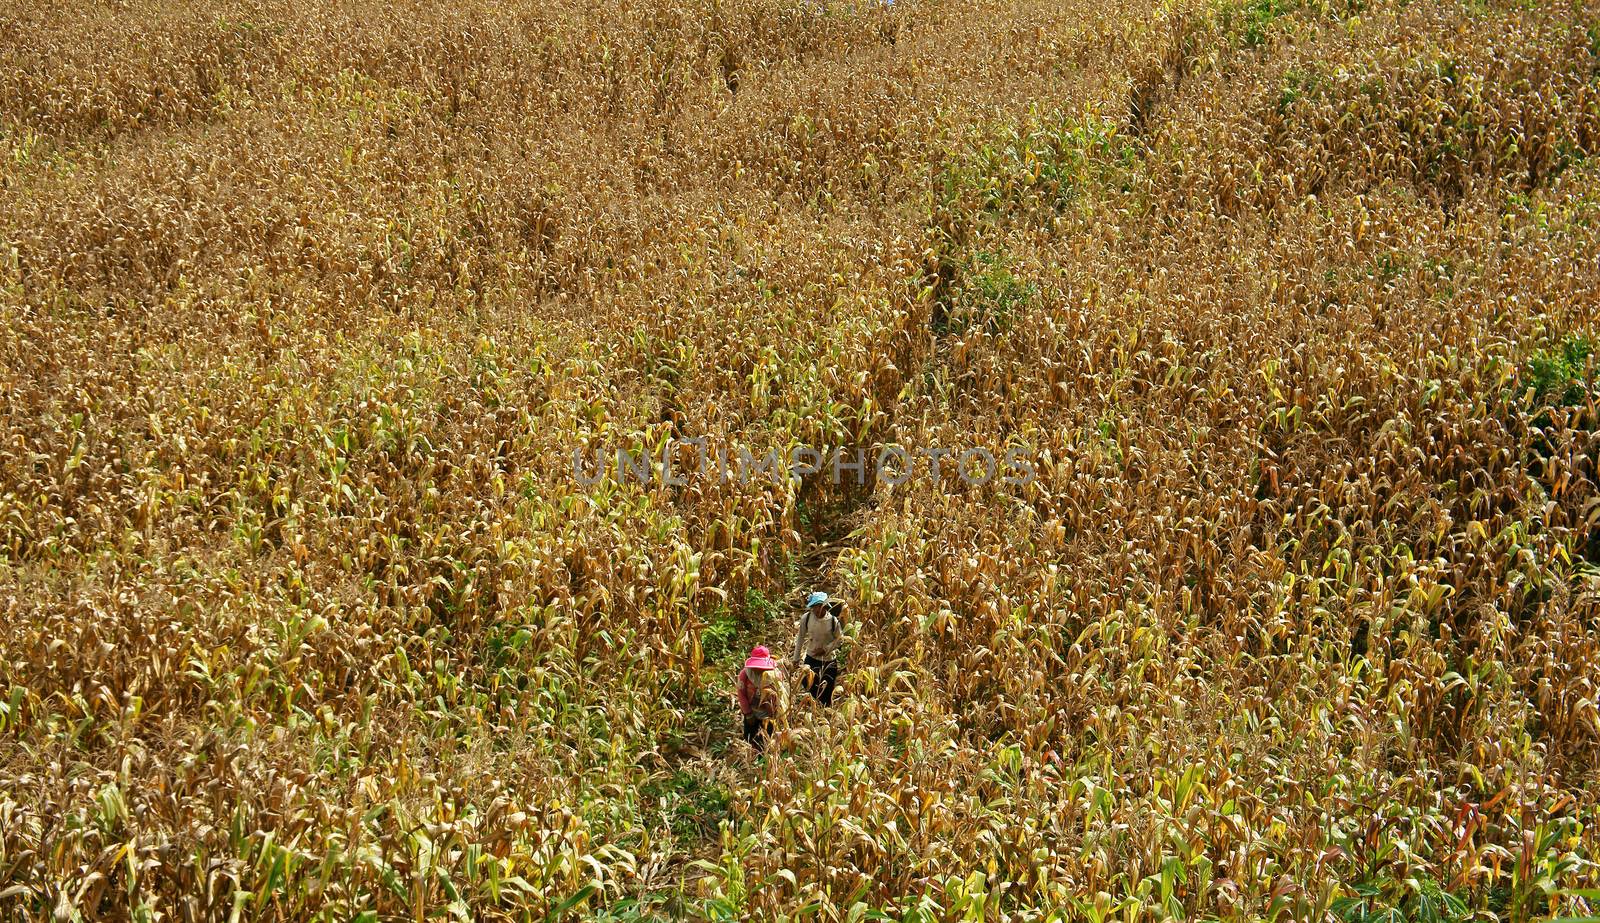 Corn - field ready to harvest, they in yellow color, 2 people wear red and cyan hat going among the field